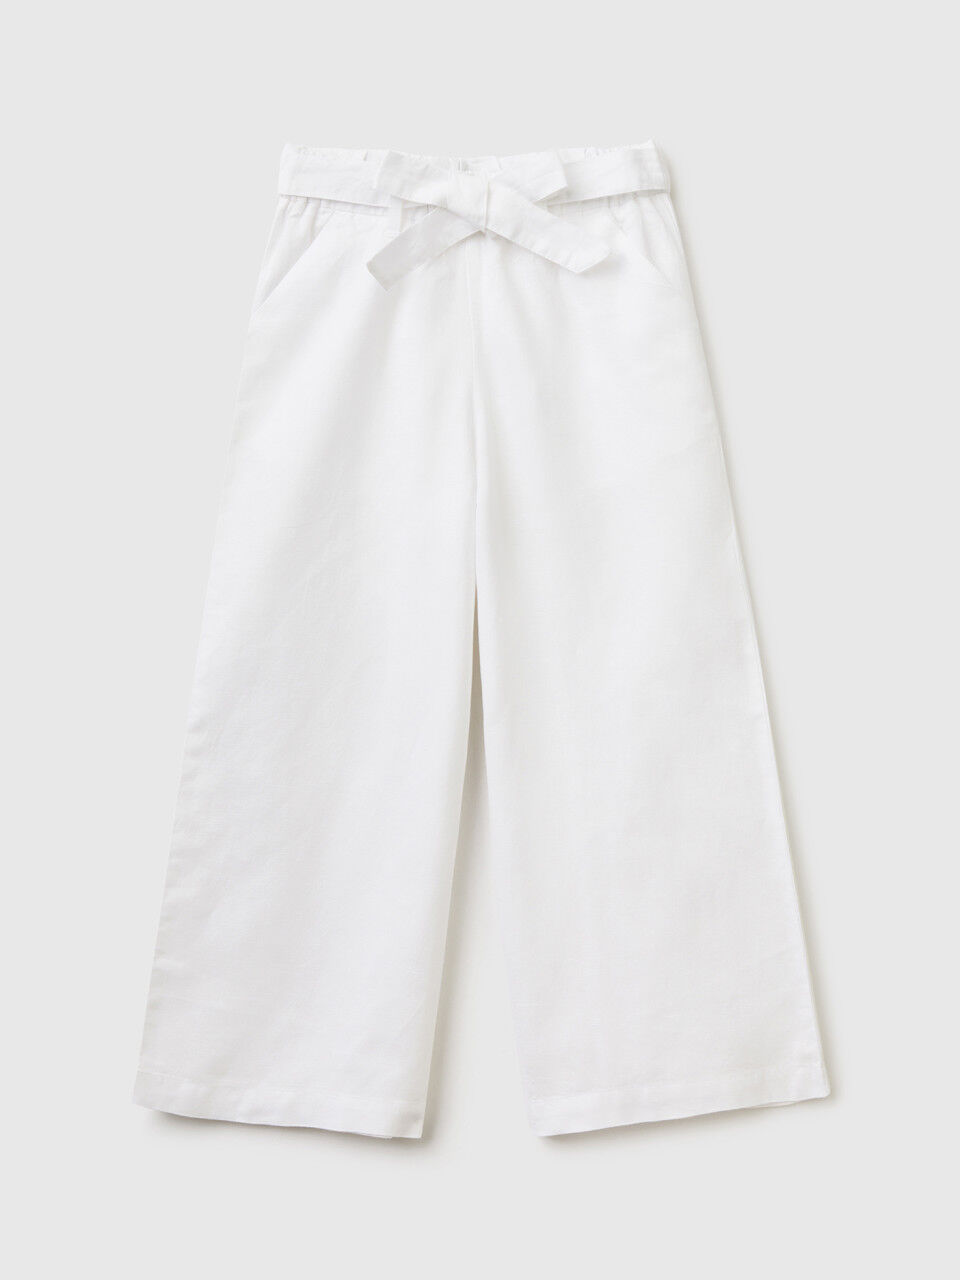 Palazzo trousers in linen blend